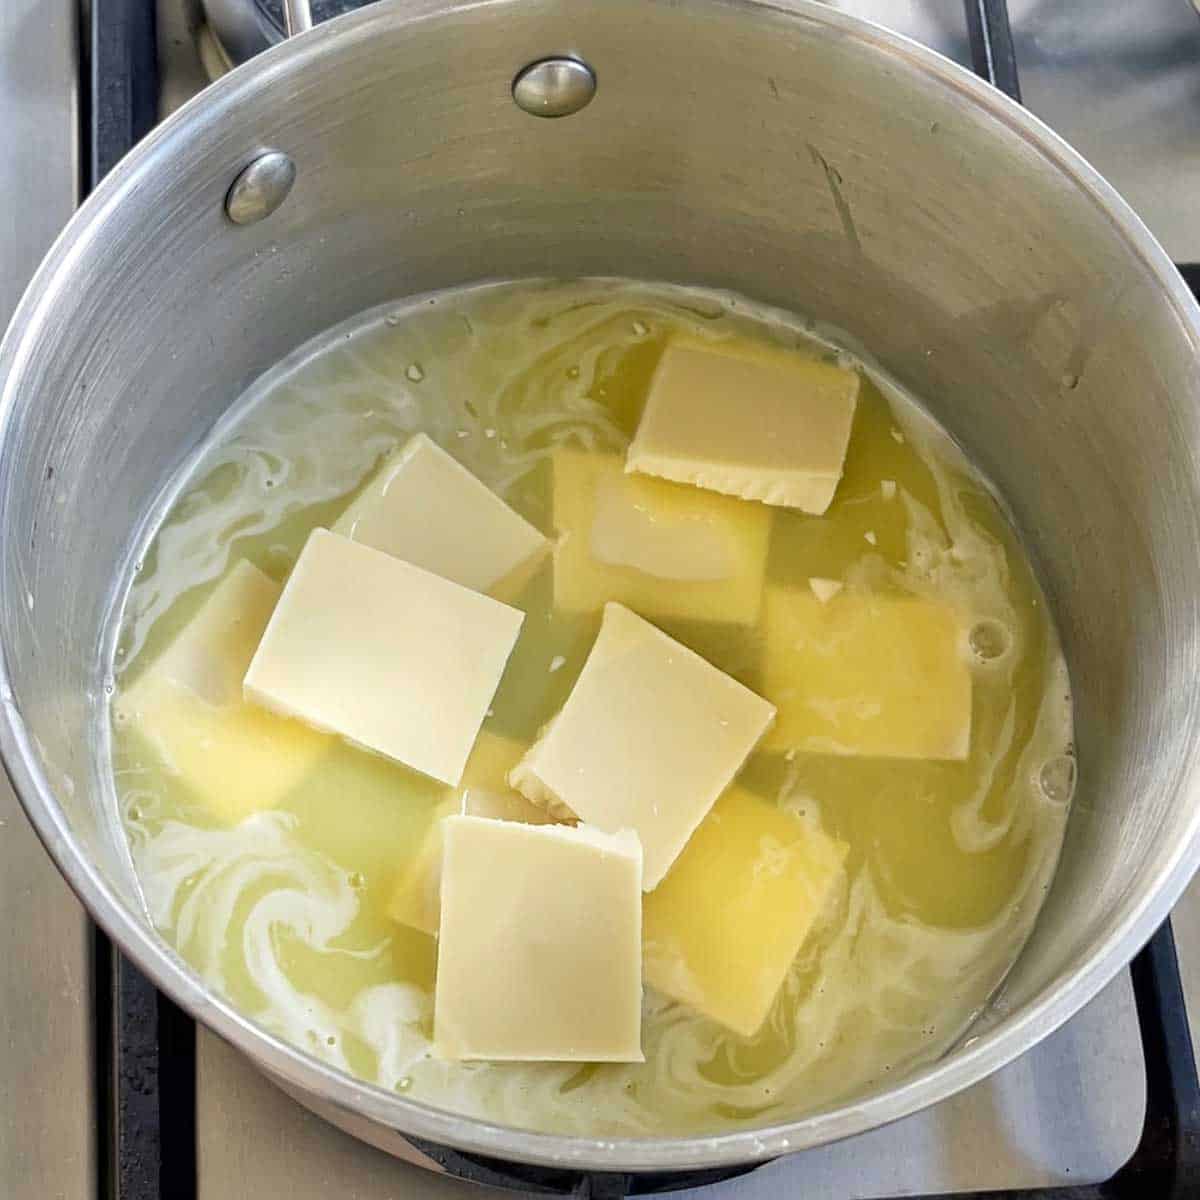 Butter and white chocolate melting in a saucepan